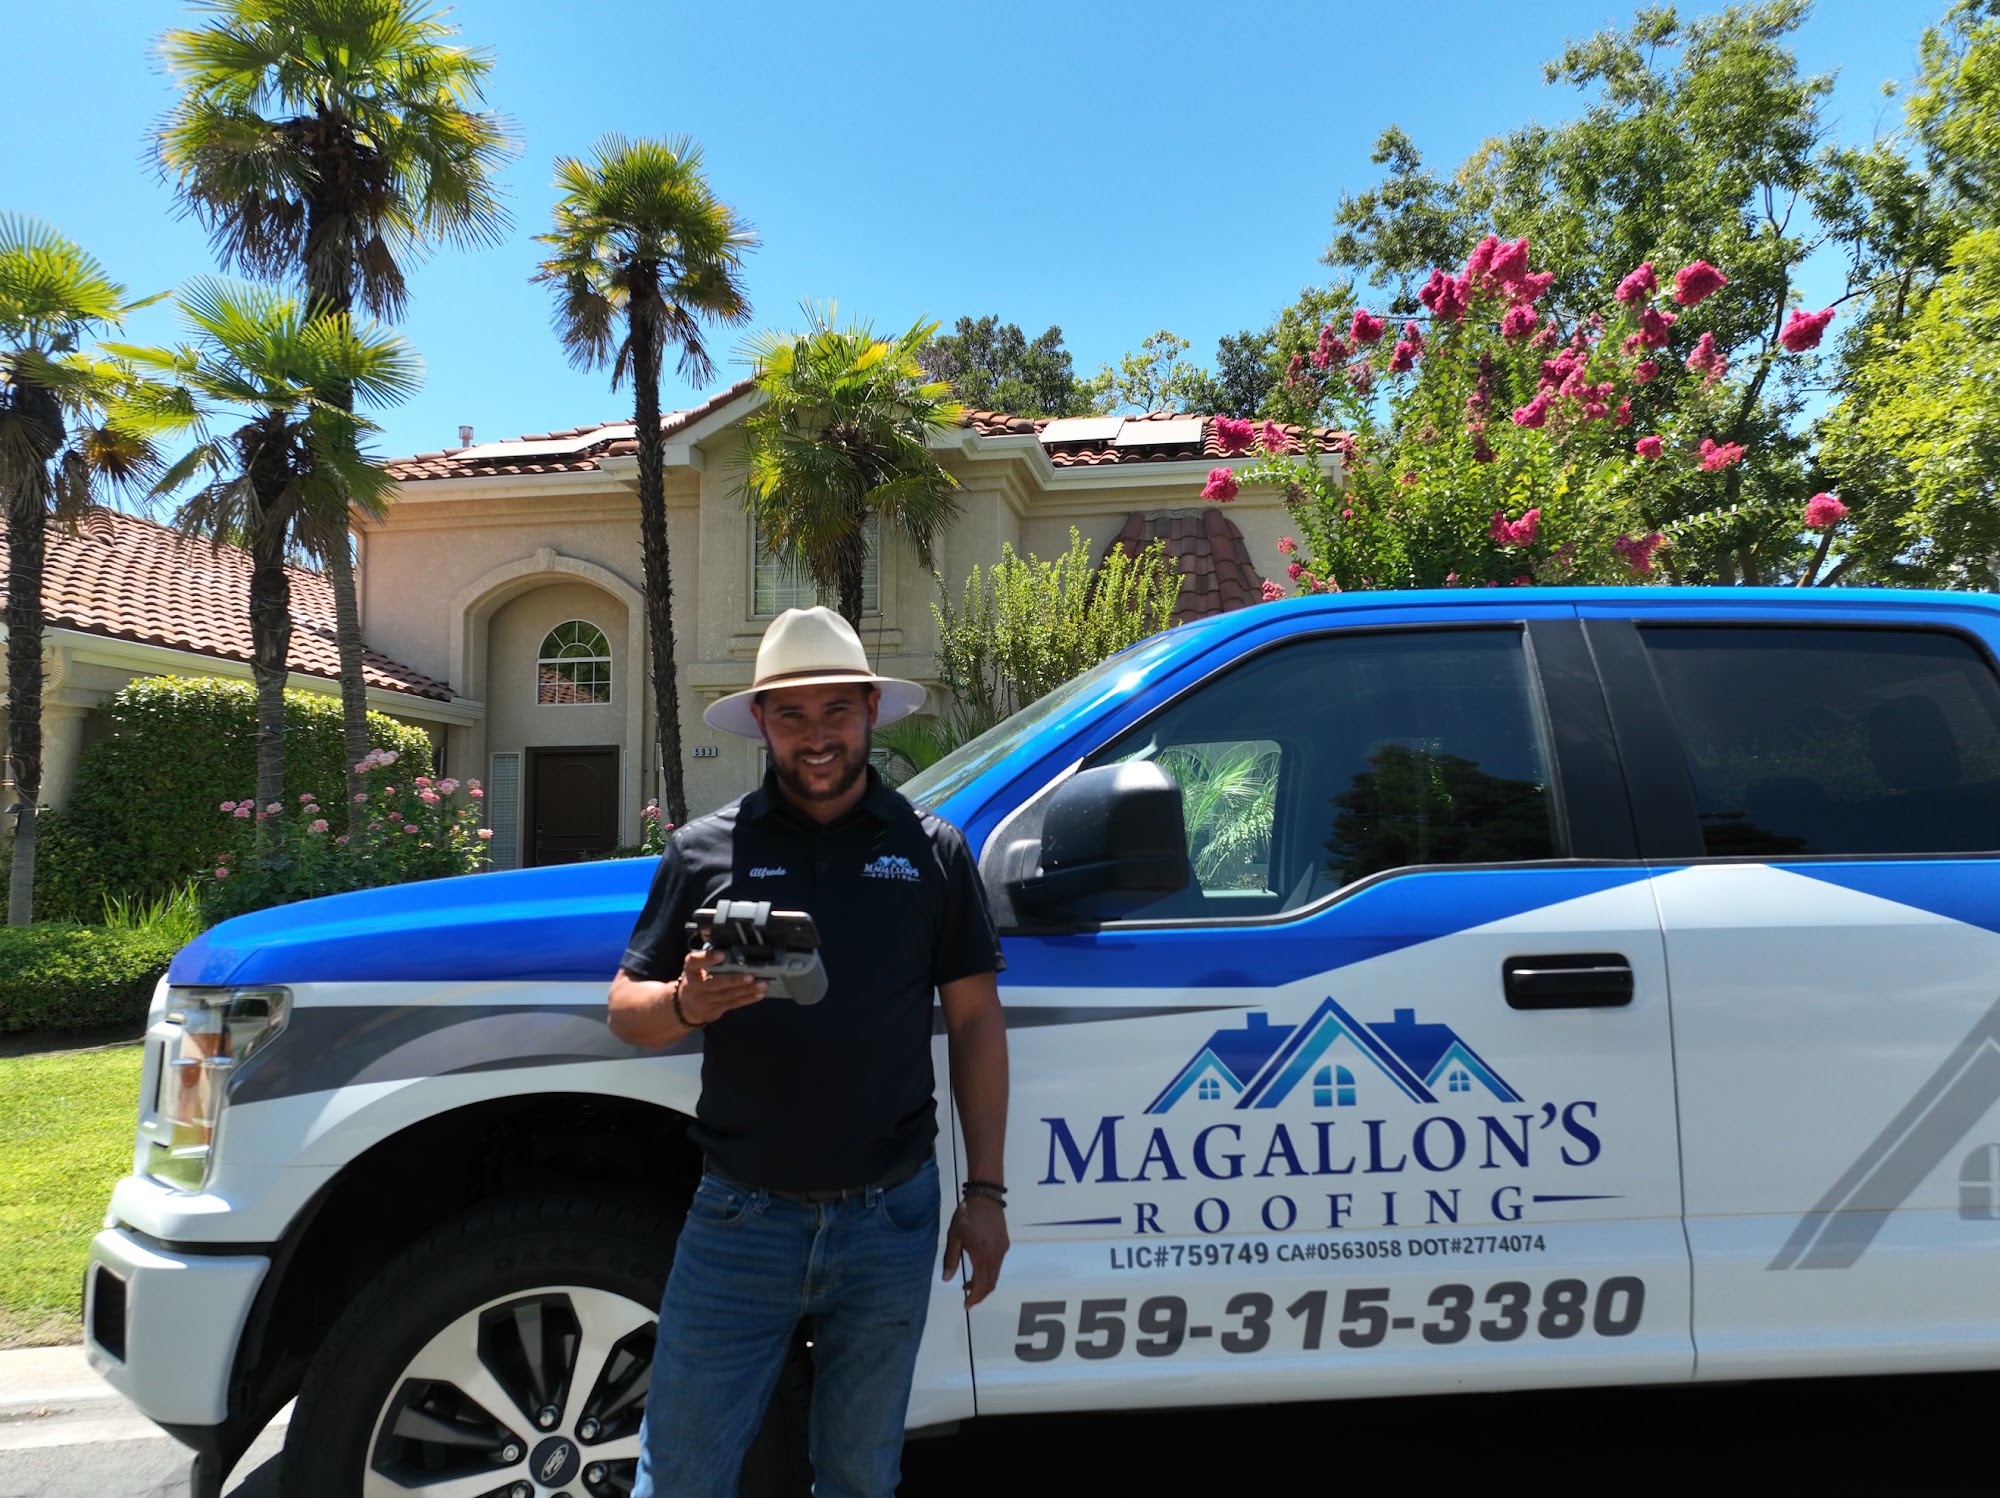 Magallon's Roofing Inc 23205 Clayton Ave, Reedley California 93654